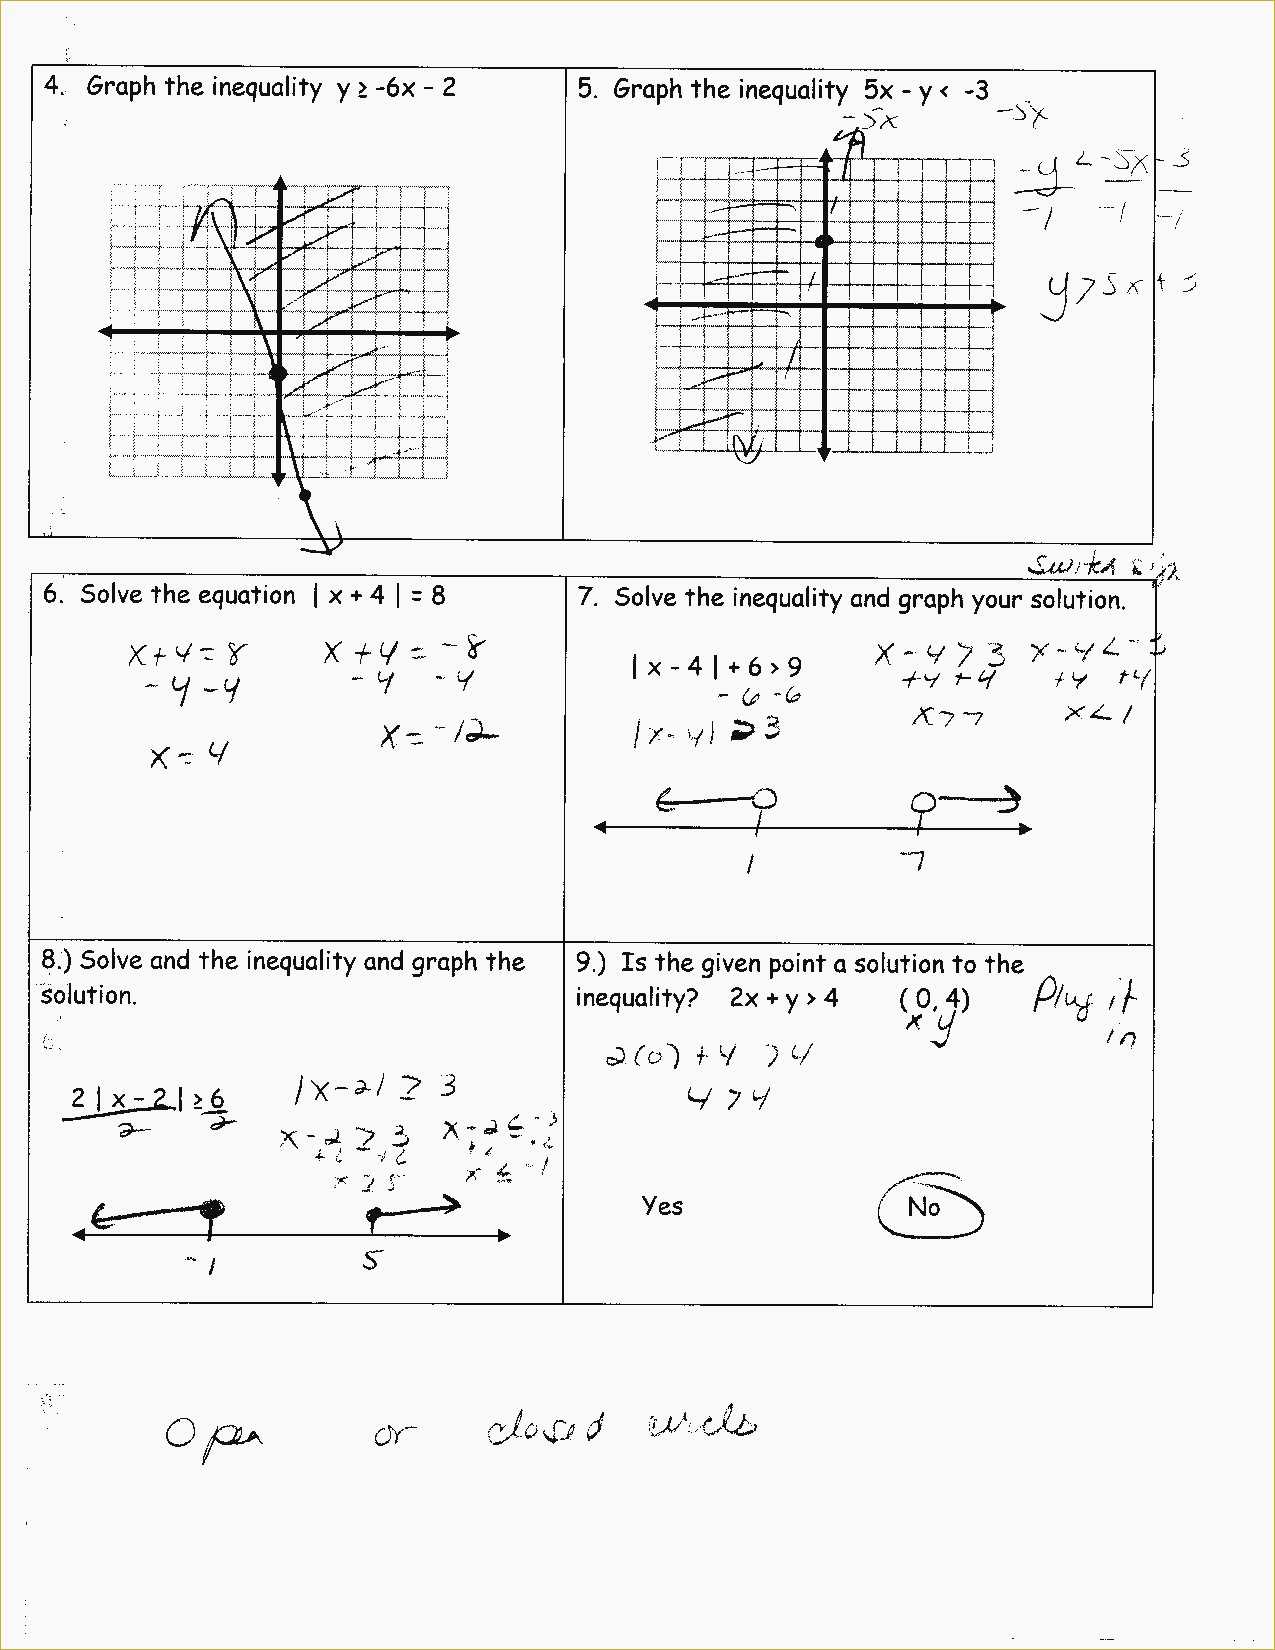 Systems Of Linear Equations Worksheet as Well as solving Systems Equations by Graphing Worksheet Algebra 2